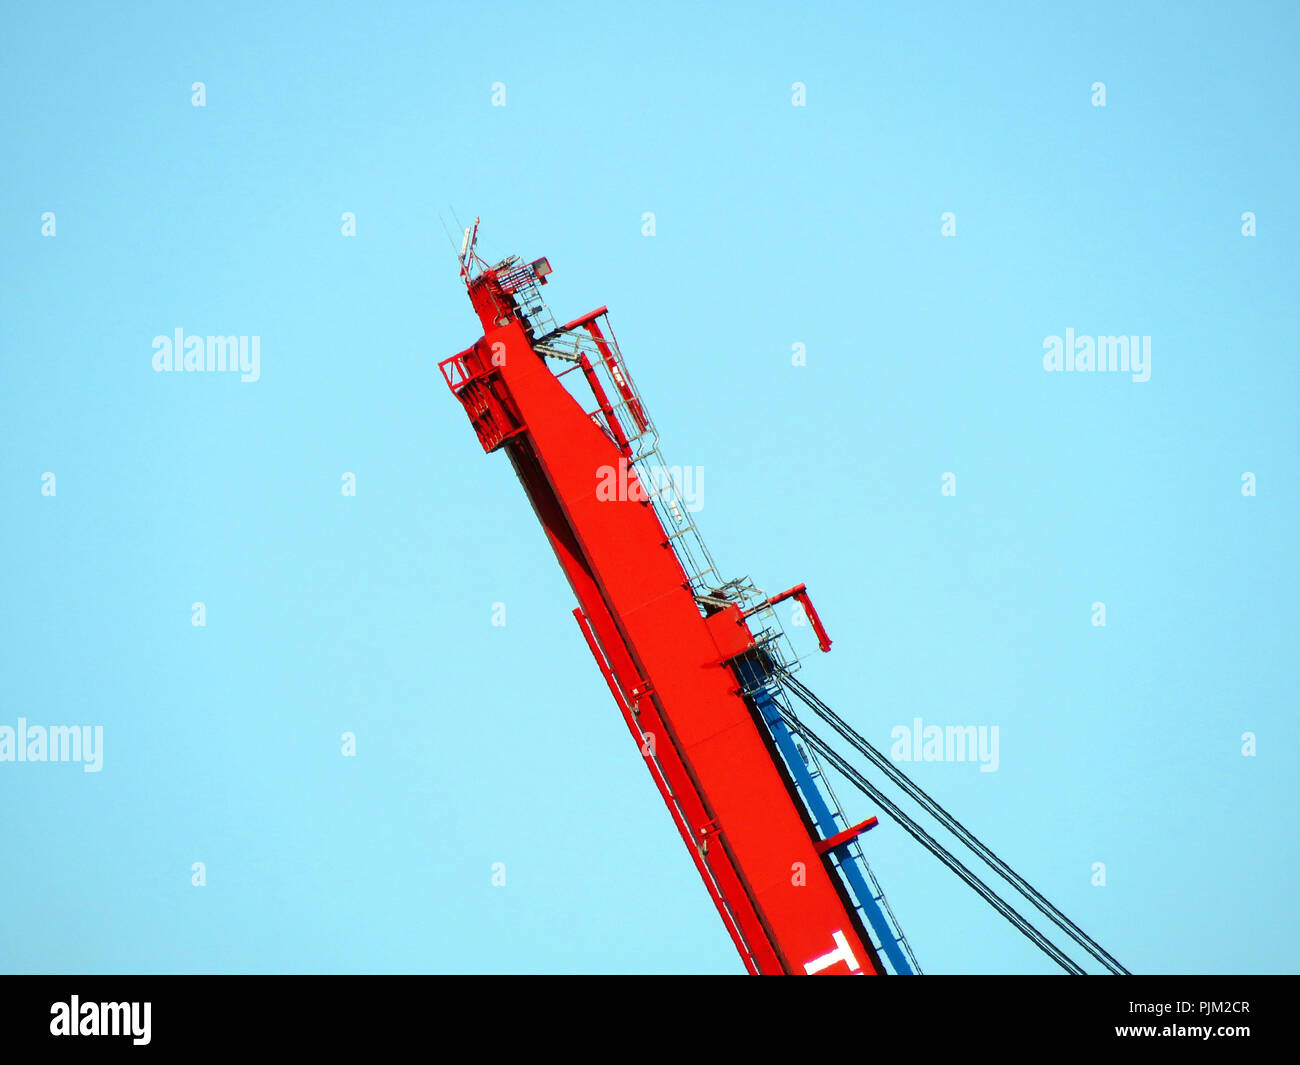 Water-side boom of a gantry crane in tilted position Stock Photo